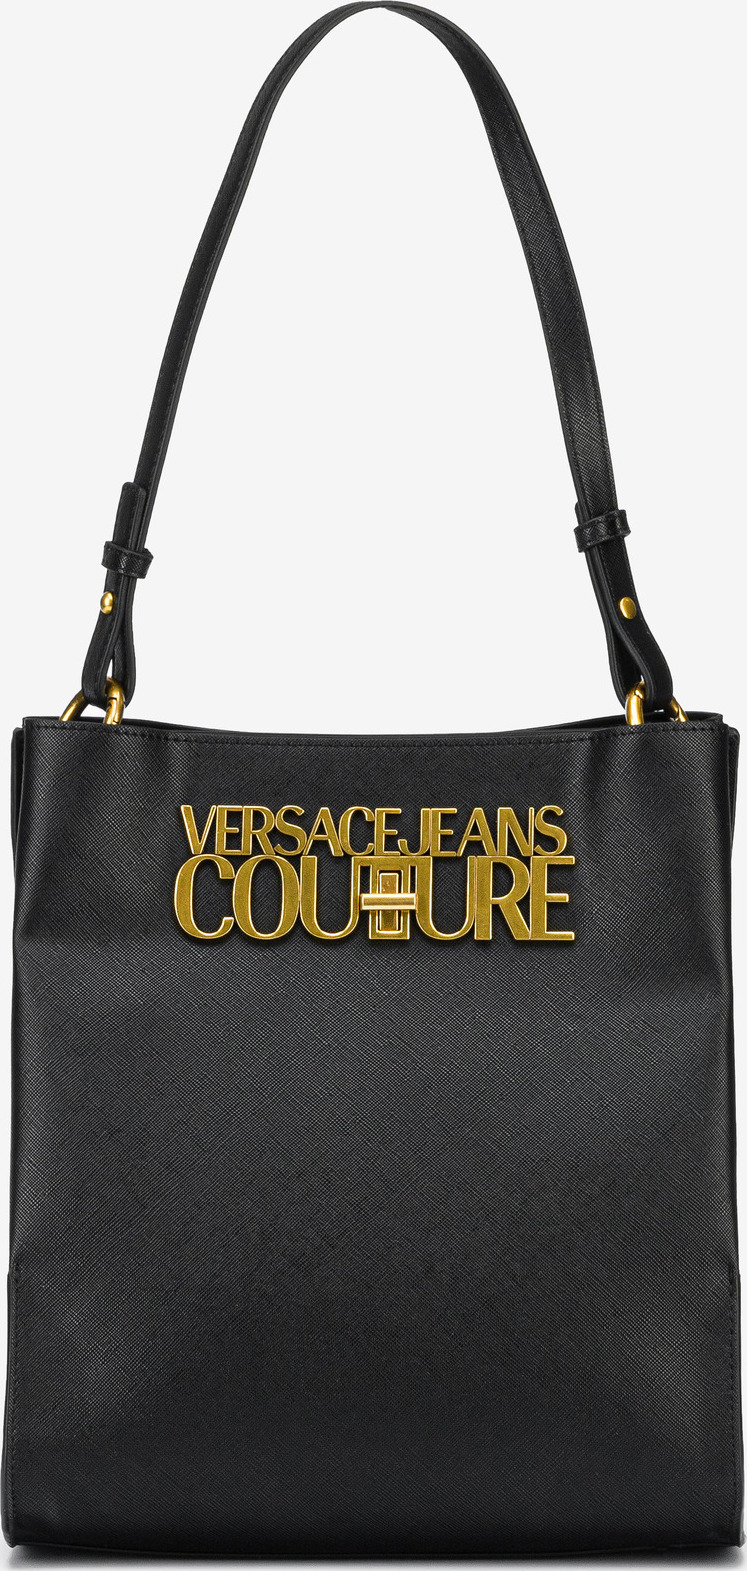 Kabelka Versace Jeans Couture Černá Versace Jeans Couture